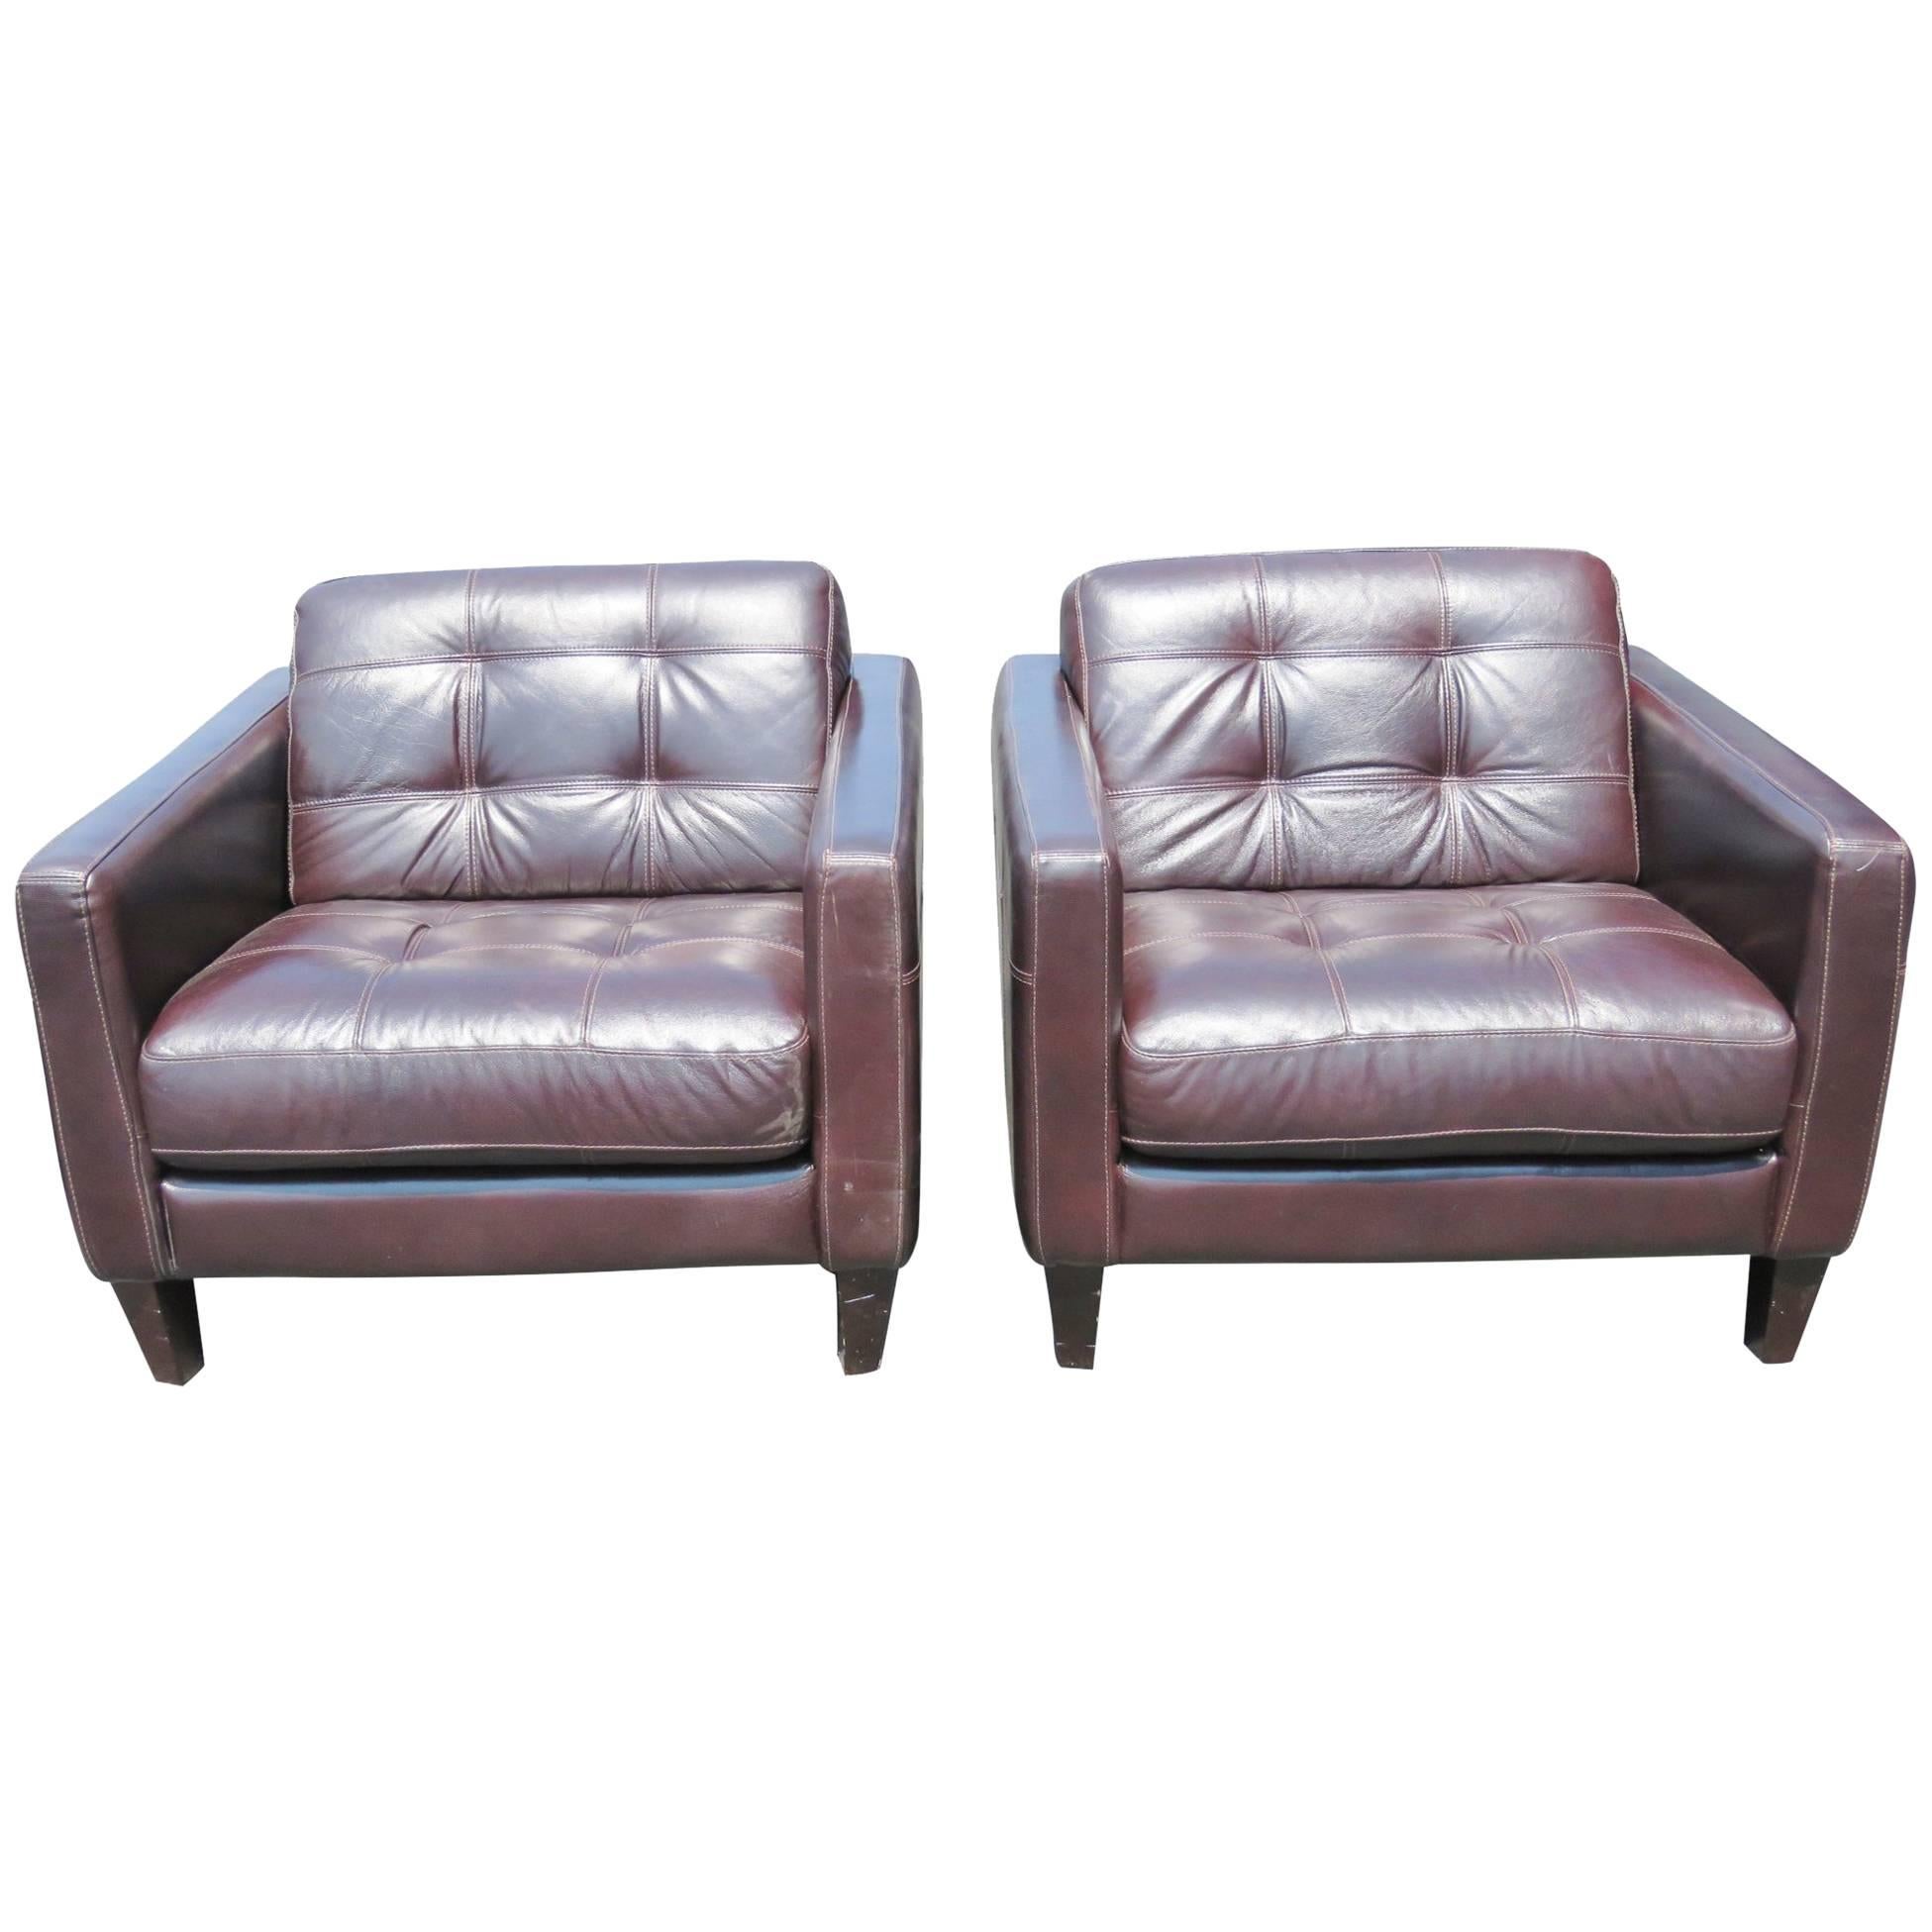 Pair of Custom Modern Design Leather Tufted Lounge Chairs